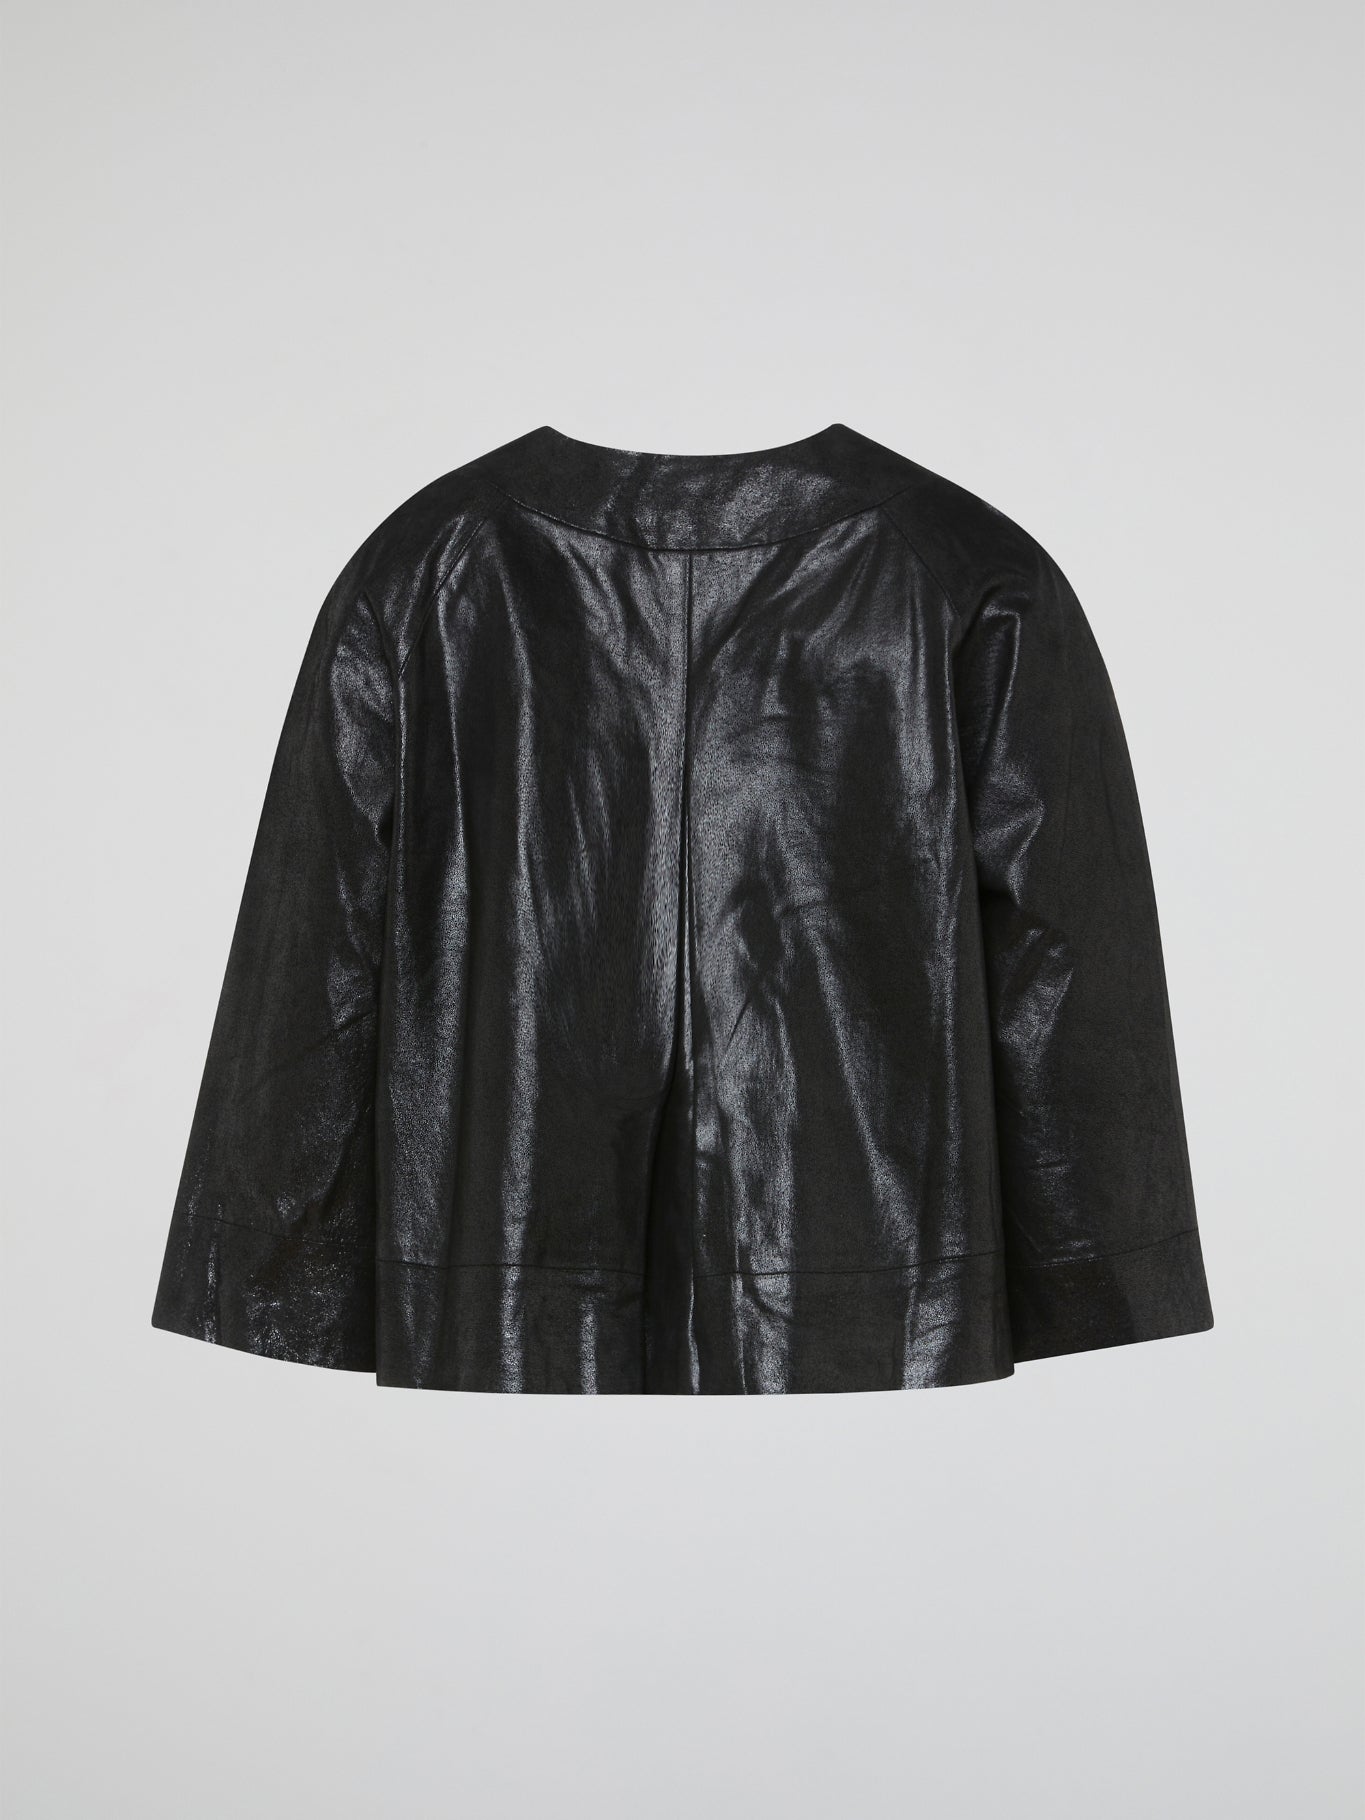 Step out in style with the Black Leather Coat from Charlotte Tarantola. Crafted from luxurious leather, this coat is a statement piece that exudes confidence and sophistication. The perfect addition to any wardrobe, this coat will elevate any outfit and have you turning heads wherever you go.